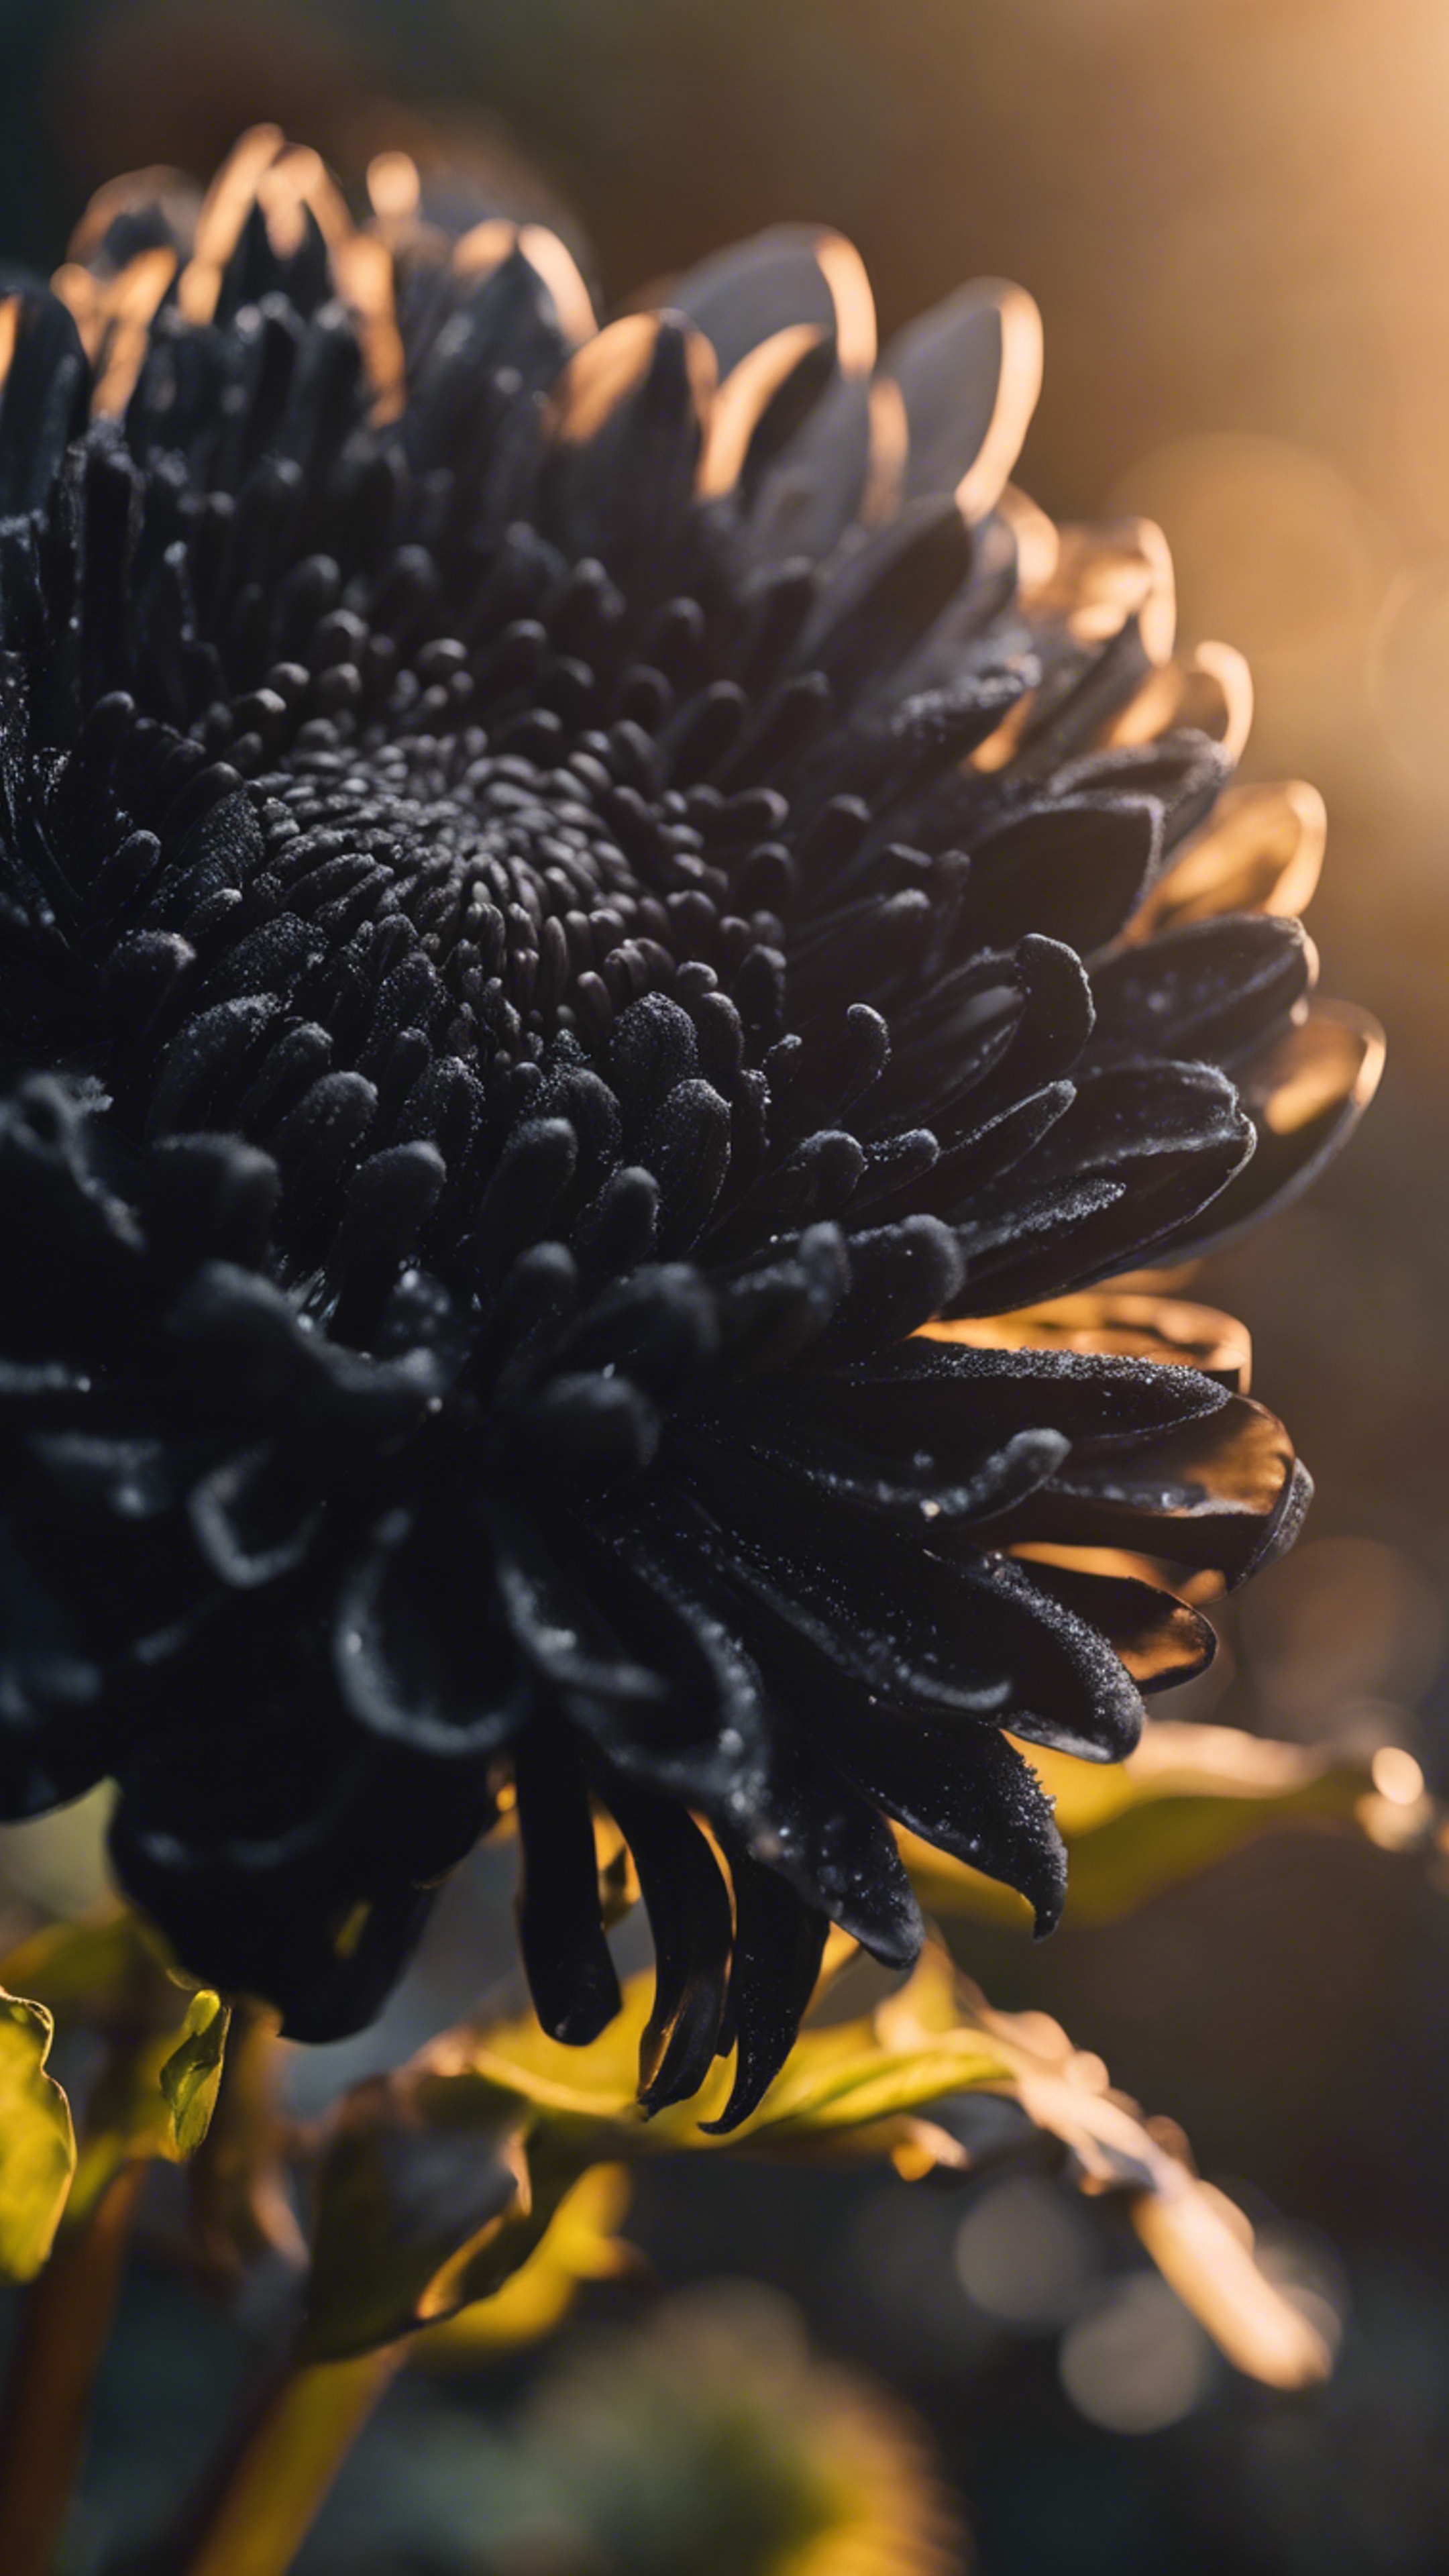 An ethereal black chrysanthemum with intricate petals against a backdrop of the setting sun. Wallpaper[4b40c3df292a42548d77]